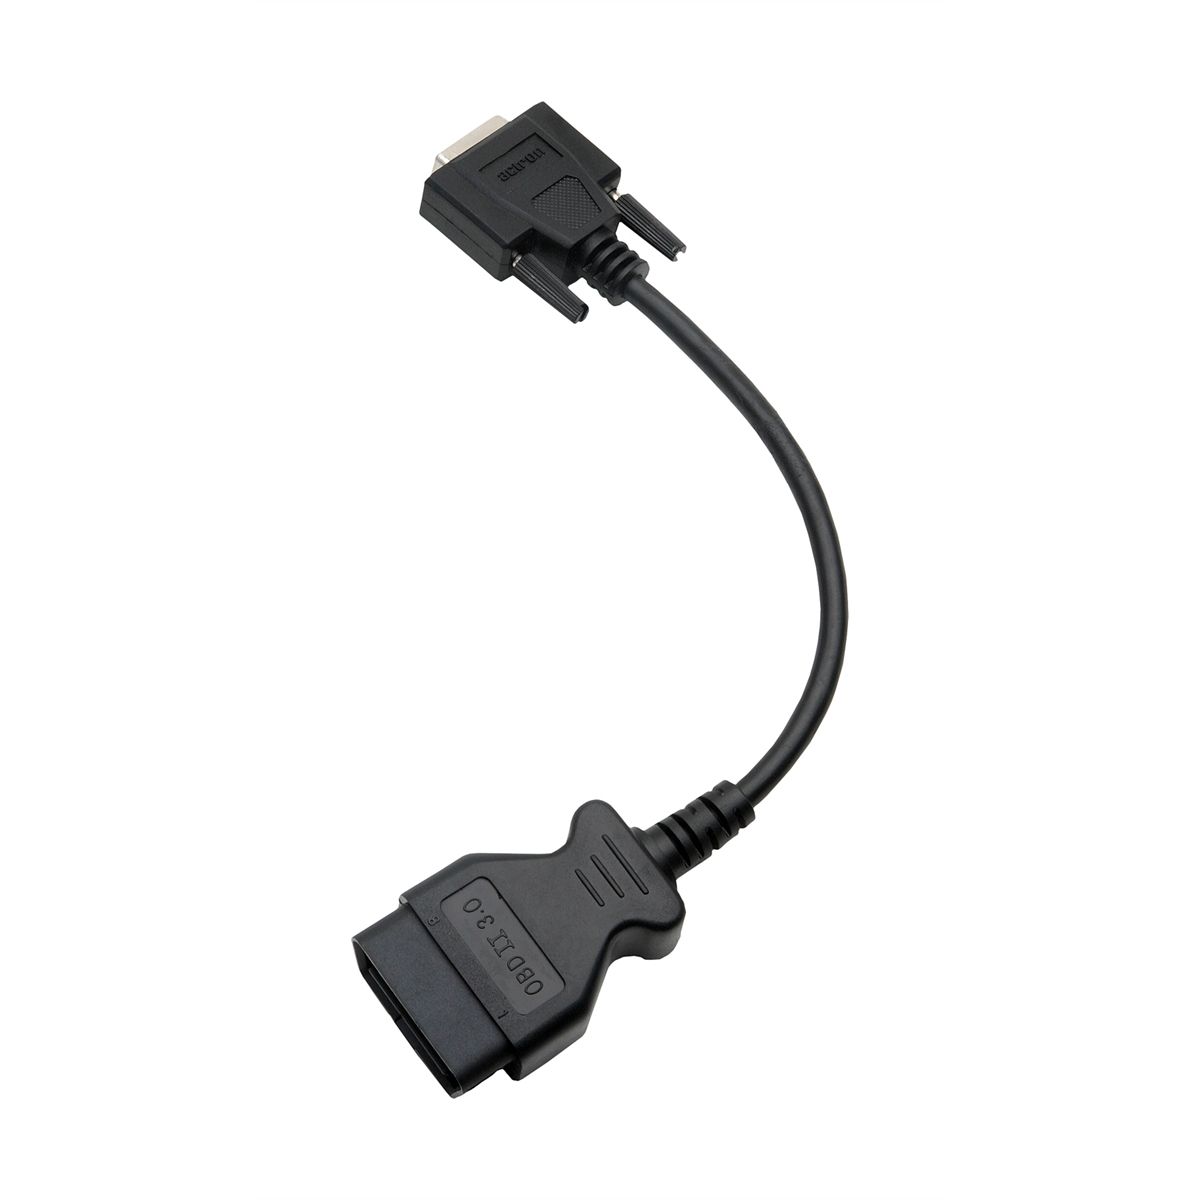 OBD II Replacement Cable for CP9145 and CP9150